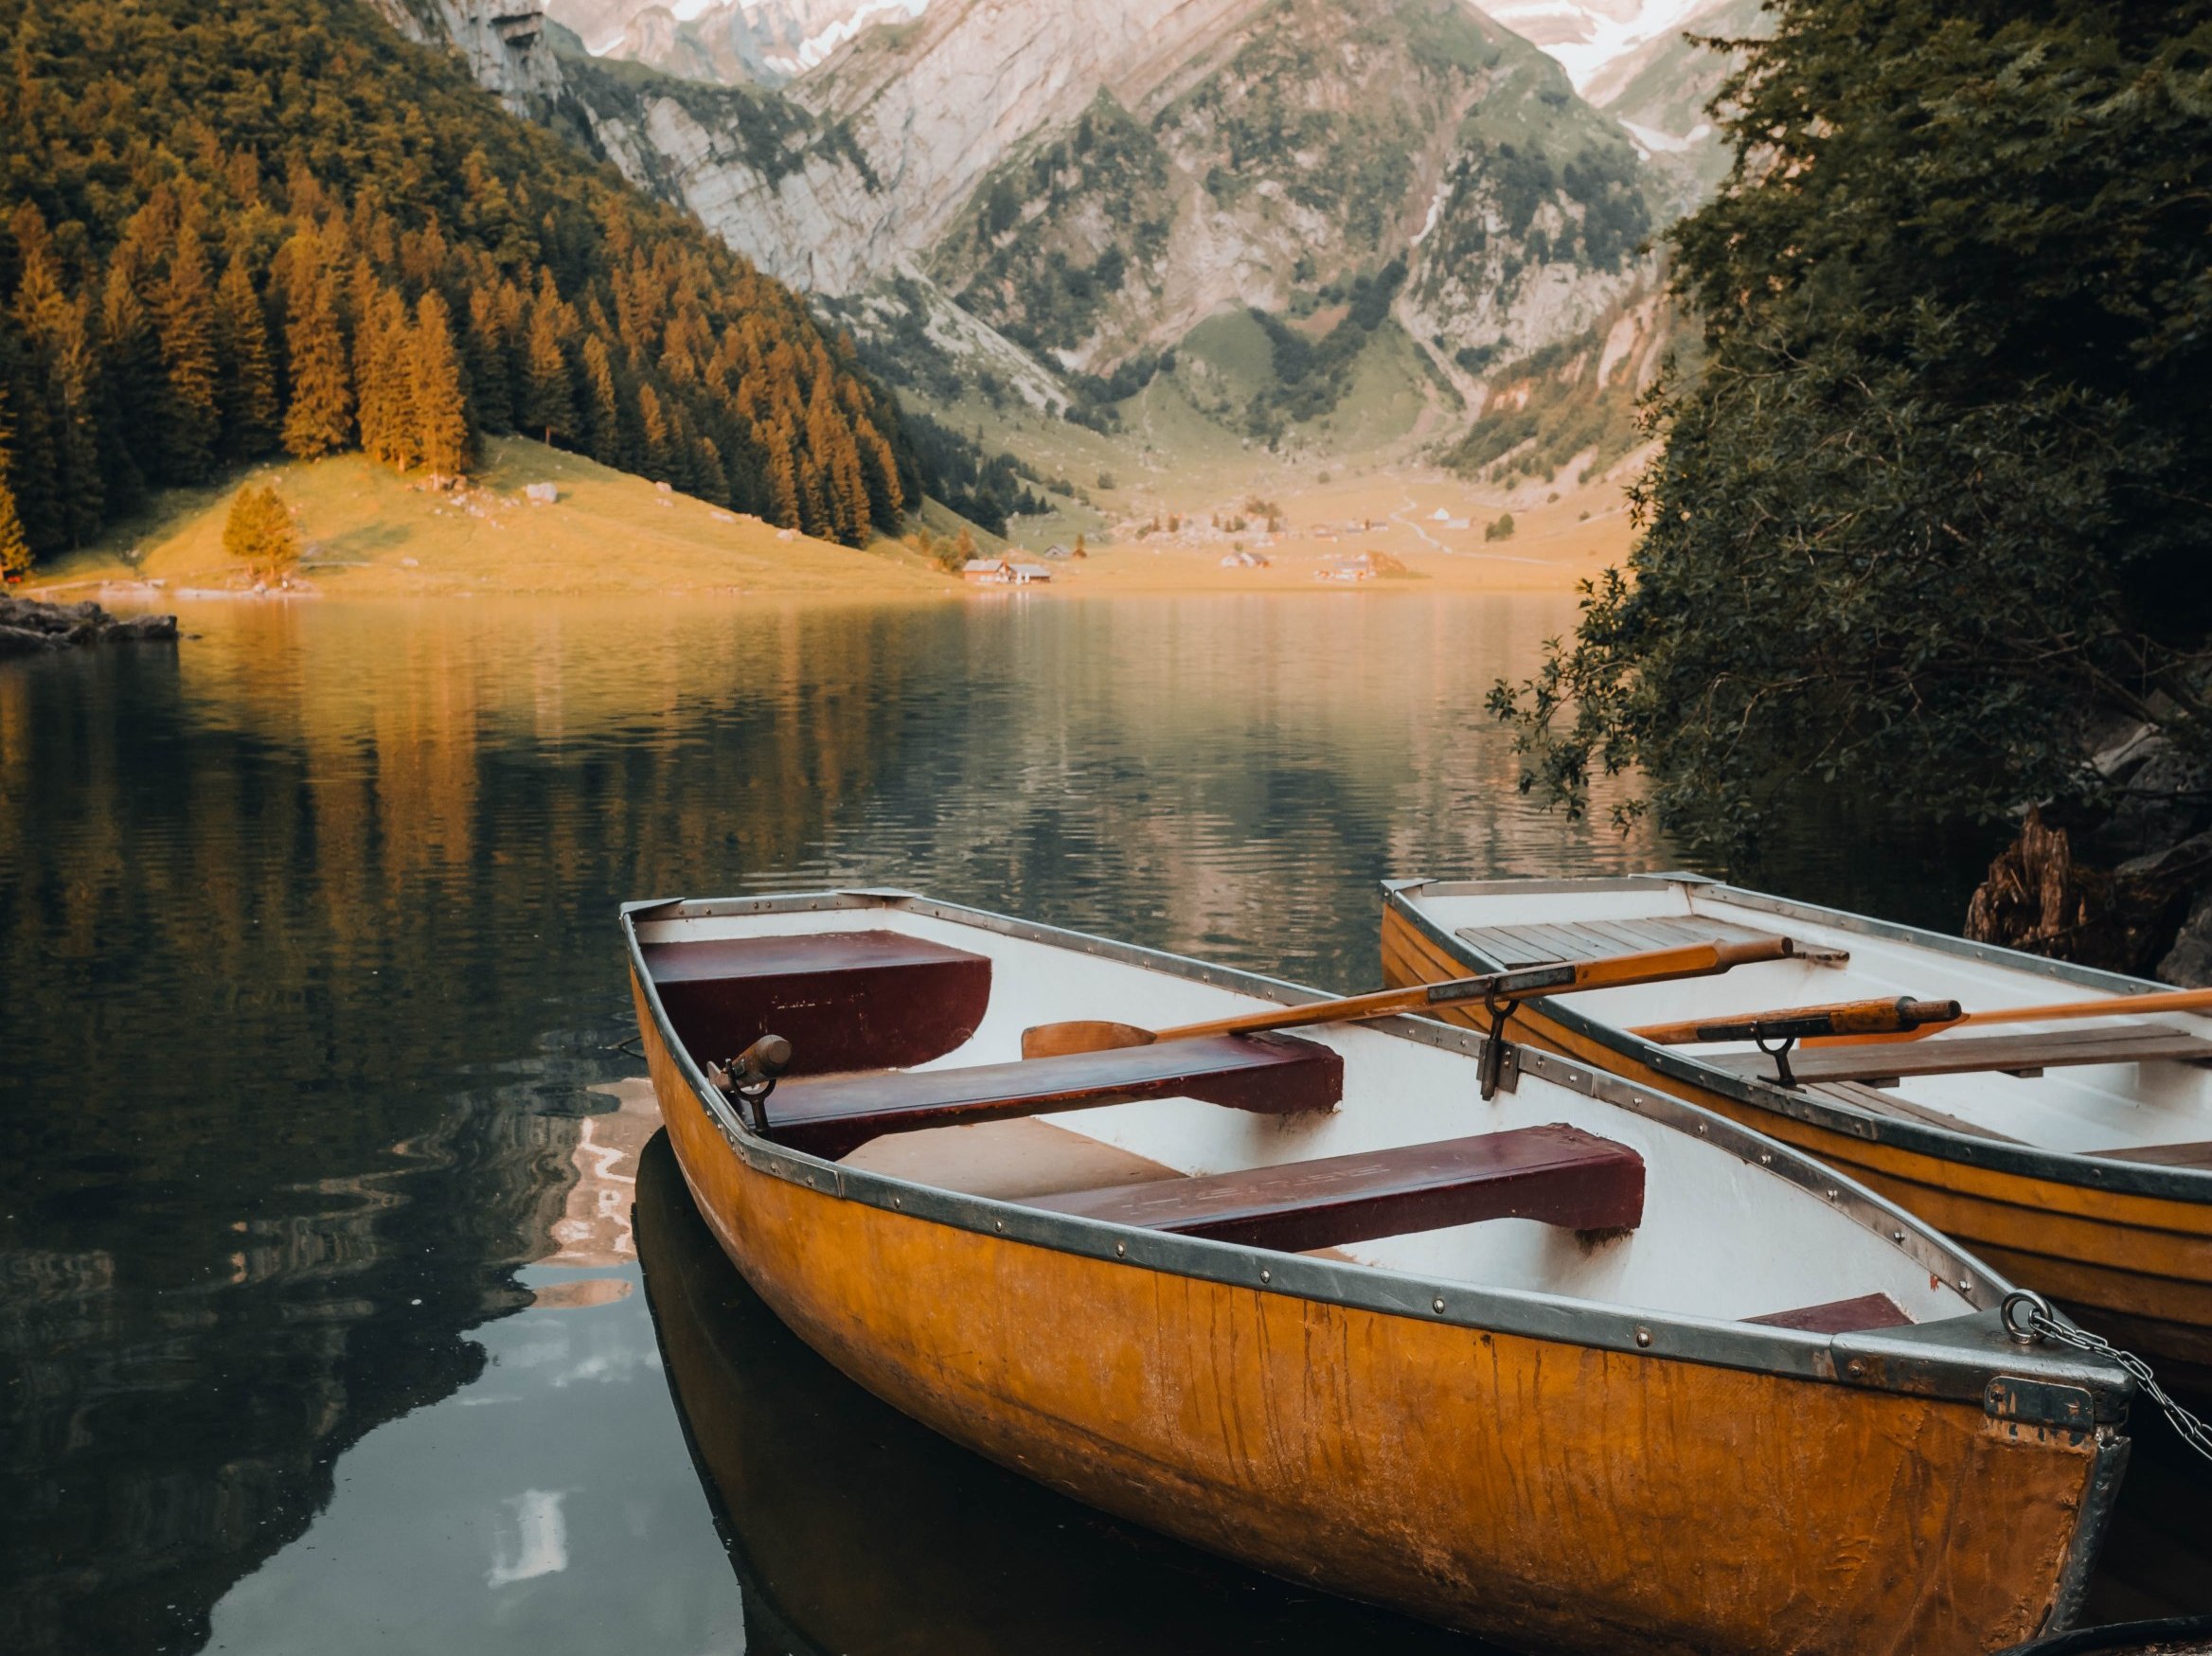 Two yellow canoes are parked on a beautiful mountain lake